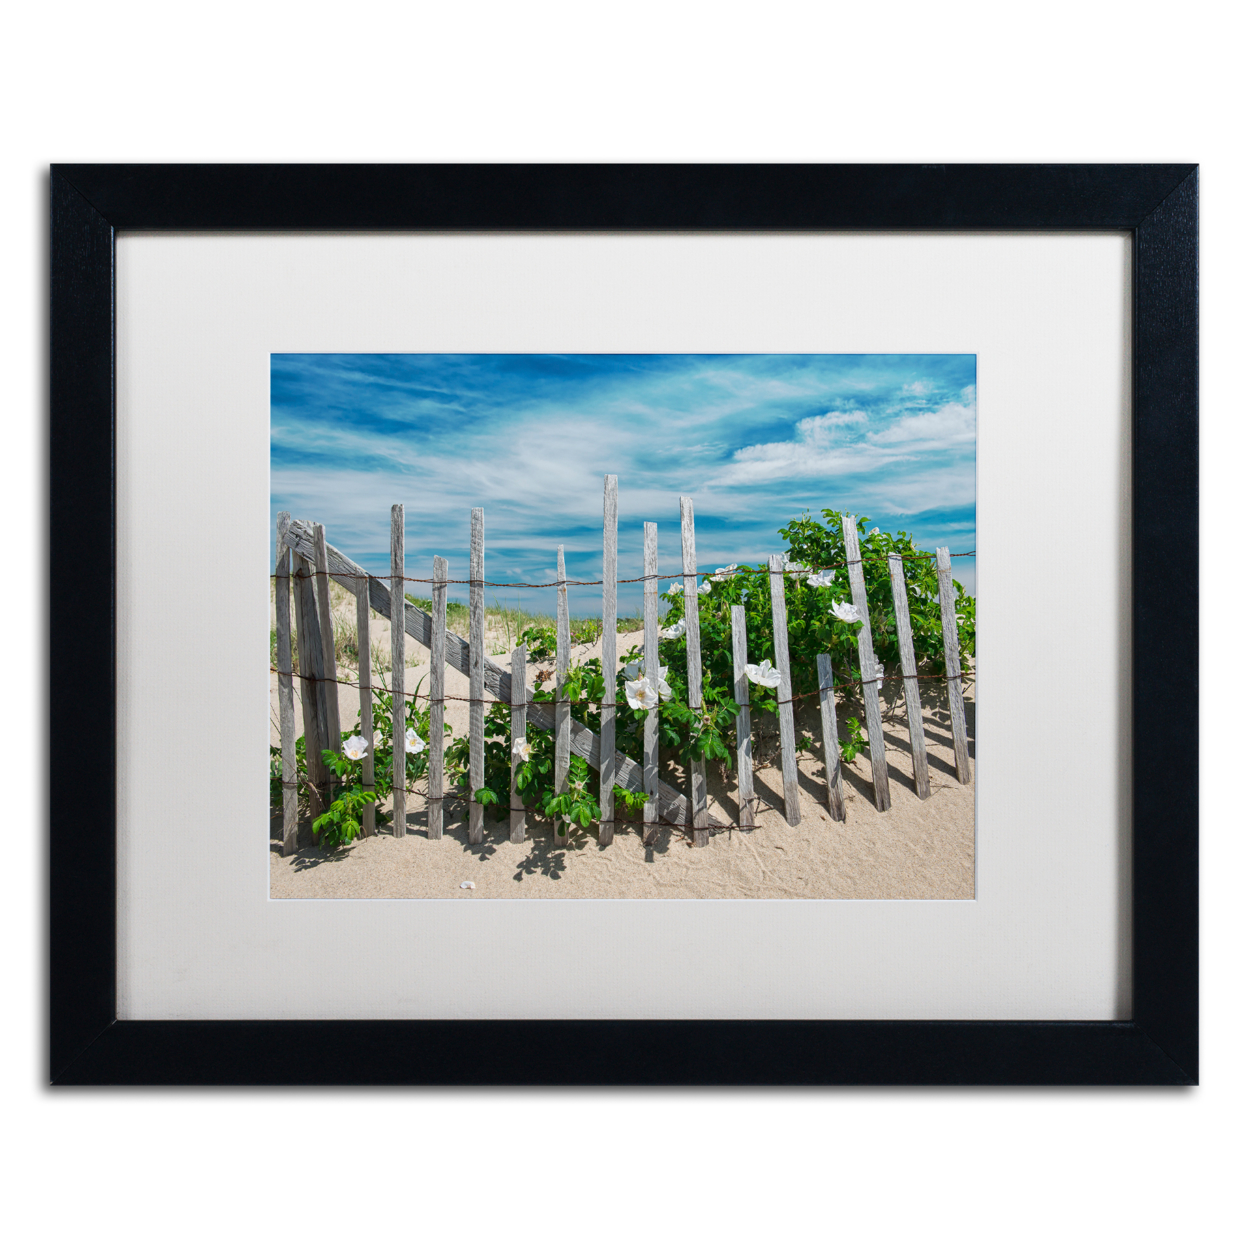 Michael Blanchette Photography 'White Beach Roses' Black Wooden Framed Art 18 X 22 Inches